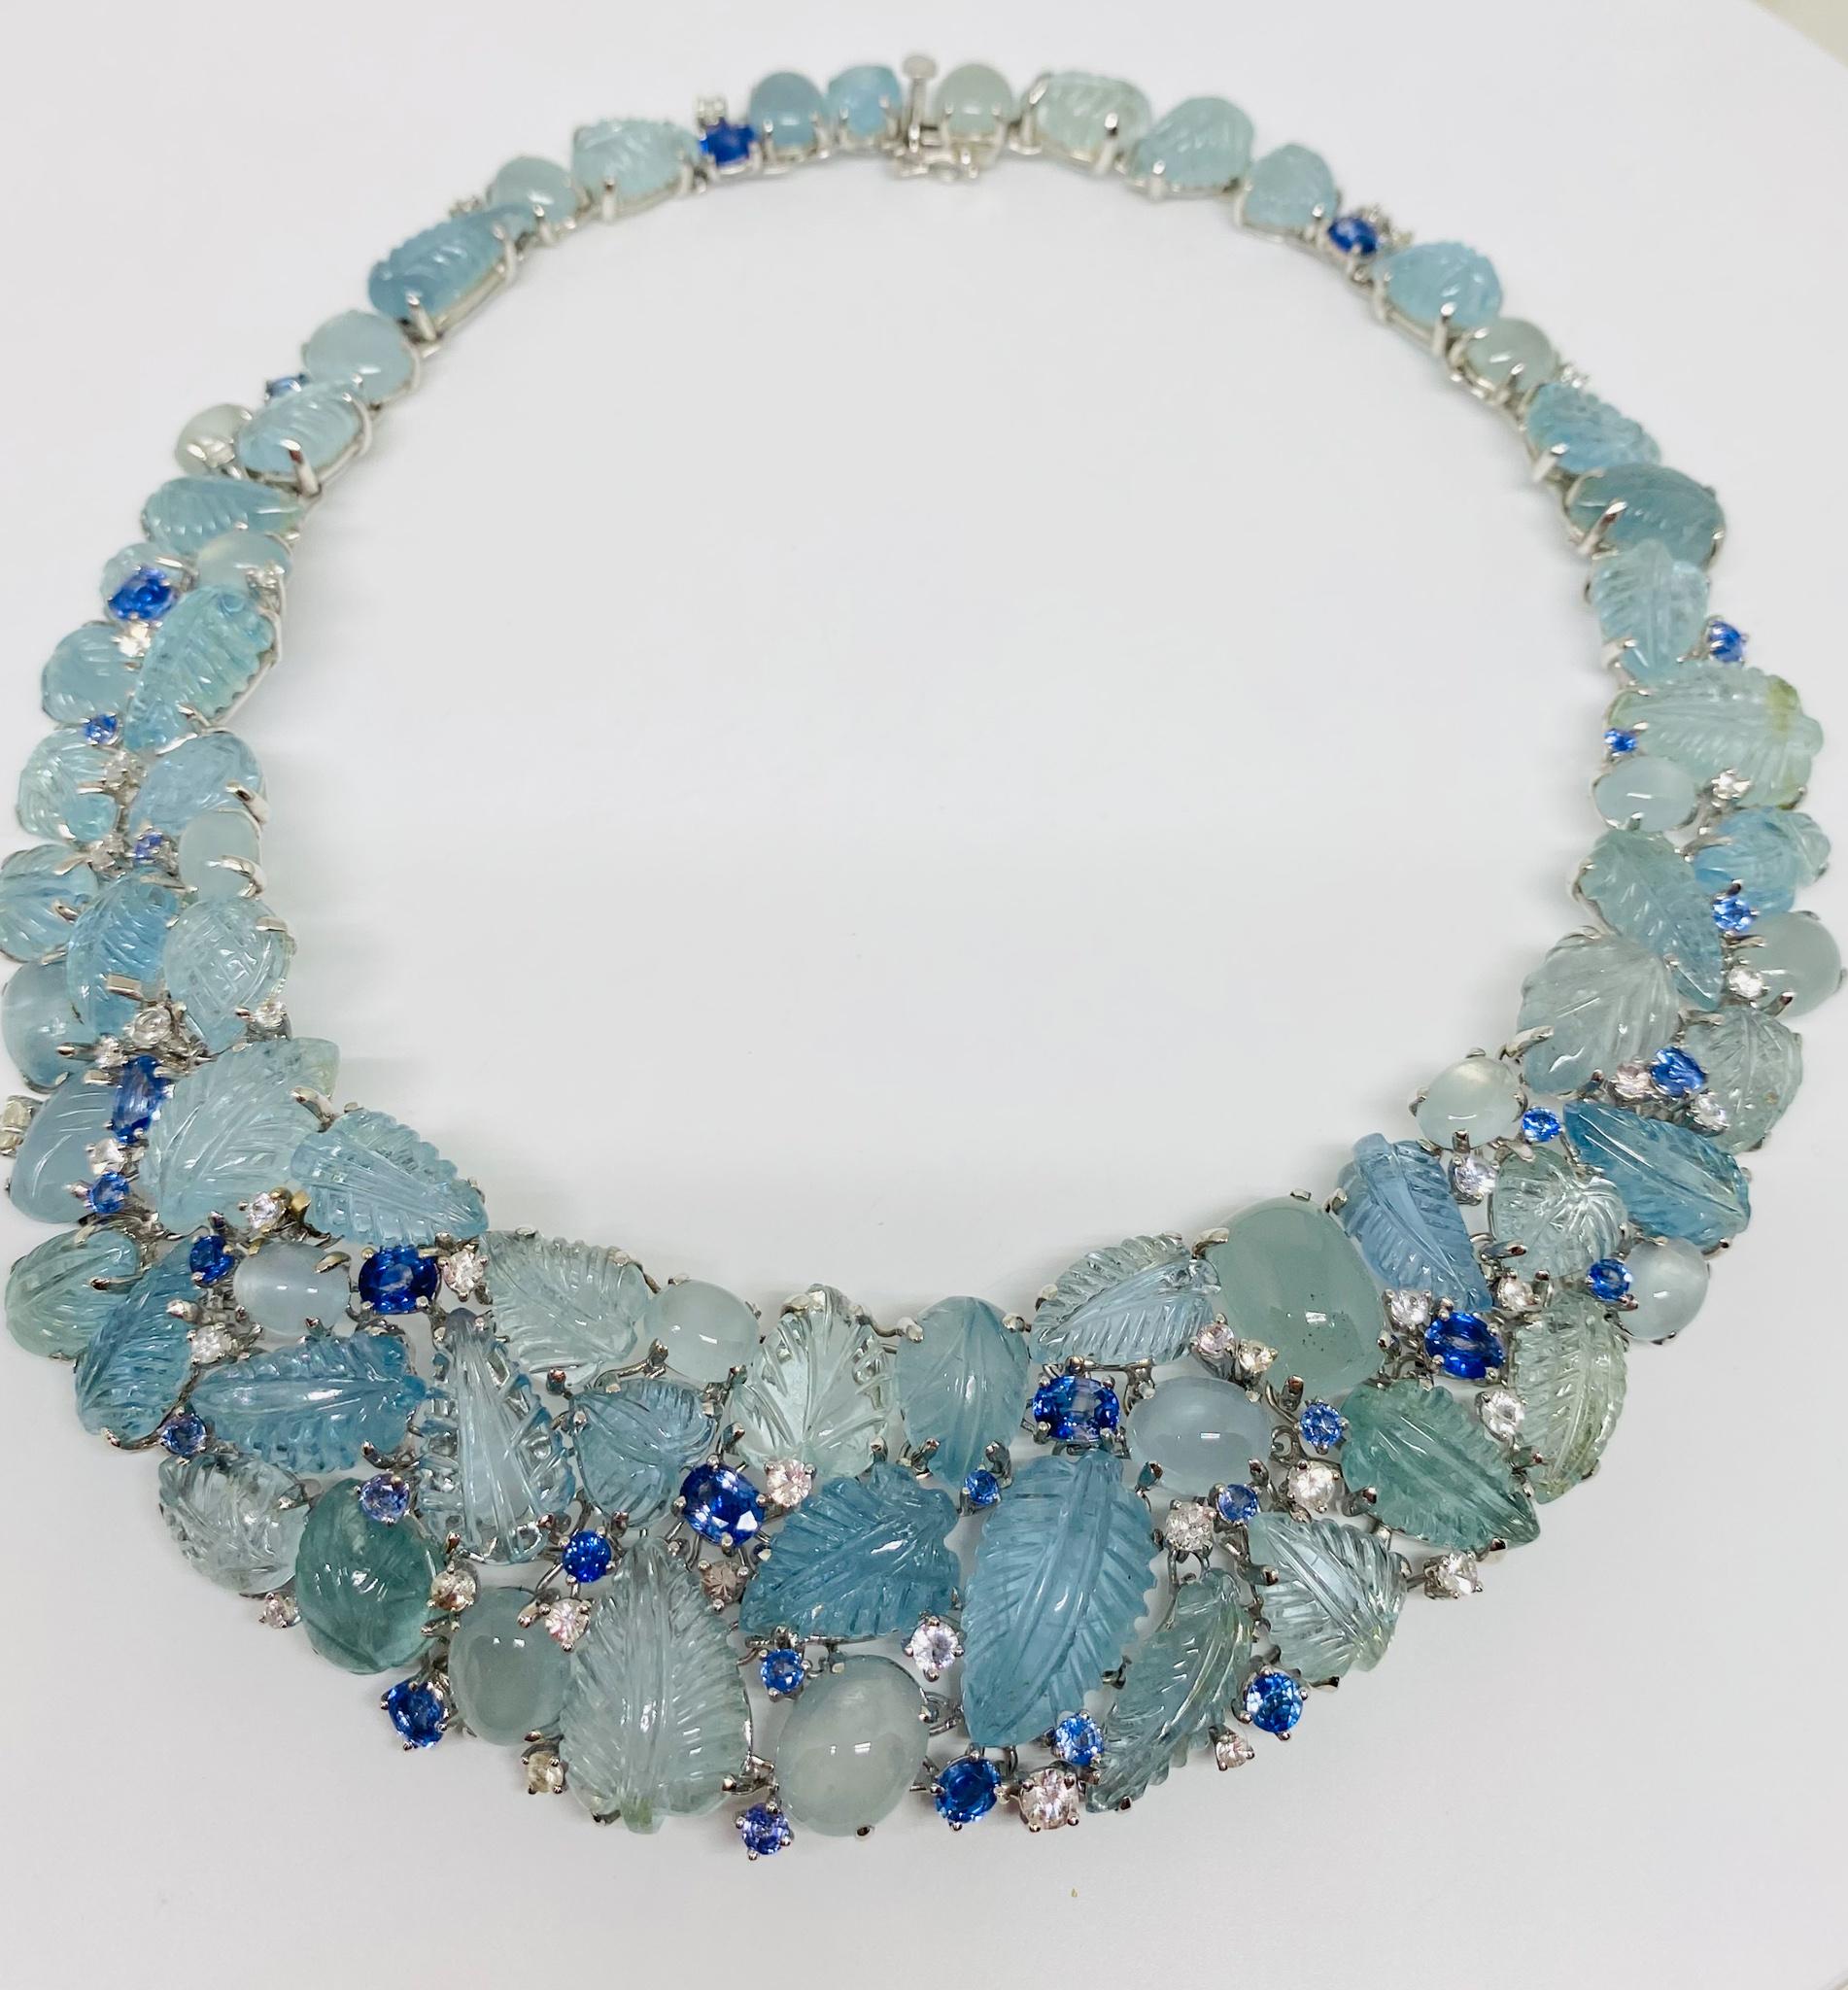 Superbly designed wide beaded necklace in 18KT white gold featuring an array of oval cut and leaf shaped cabochon aquamarines with a total weight of 285.0 carats all accented by round and oval cut blue sapphires weighing a total of 9.77 carats and